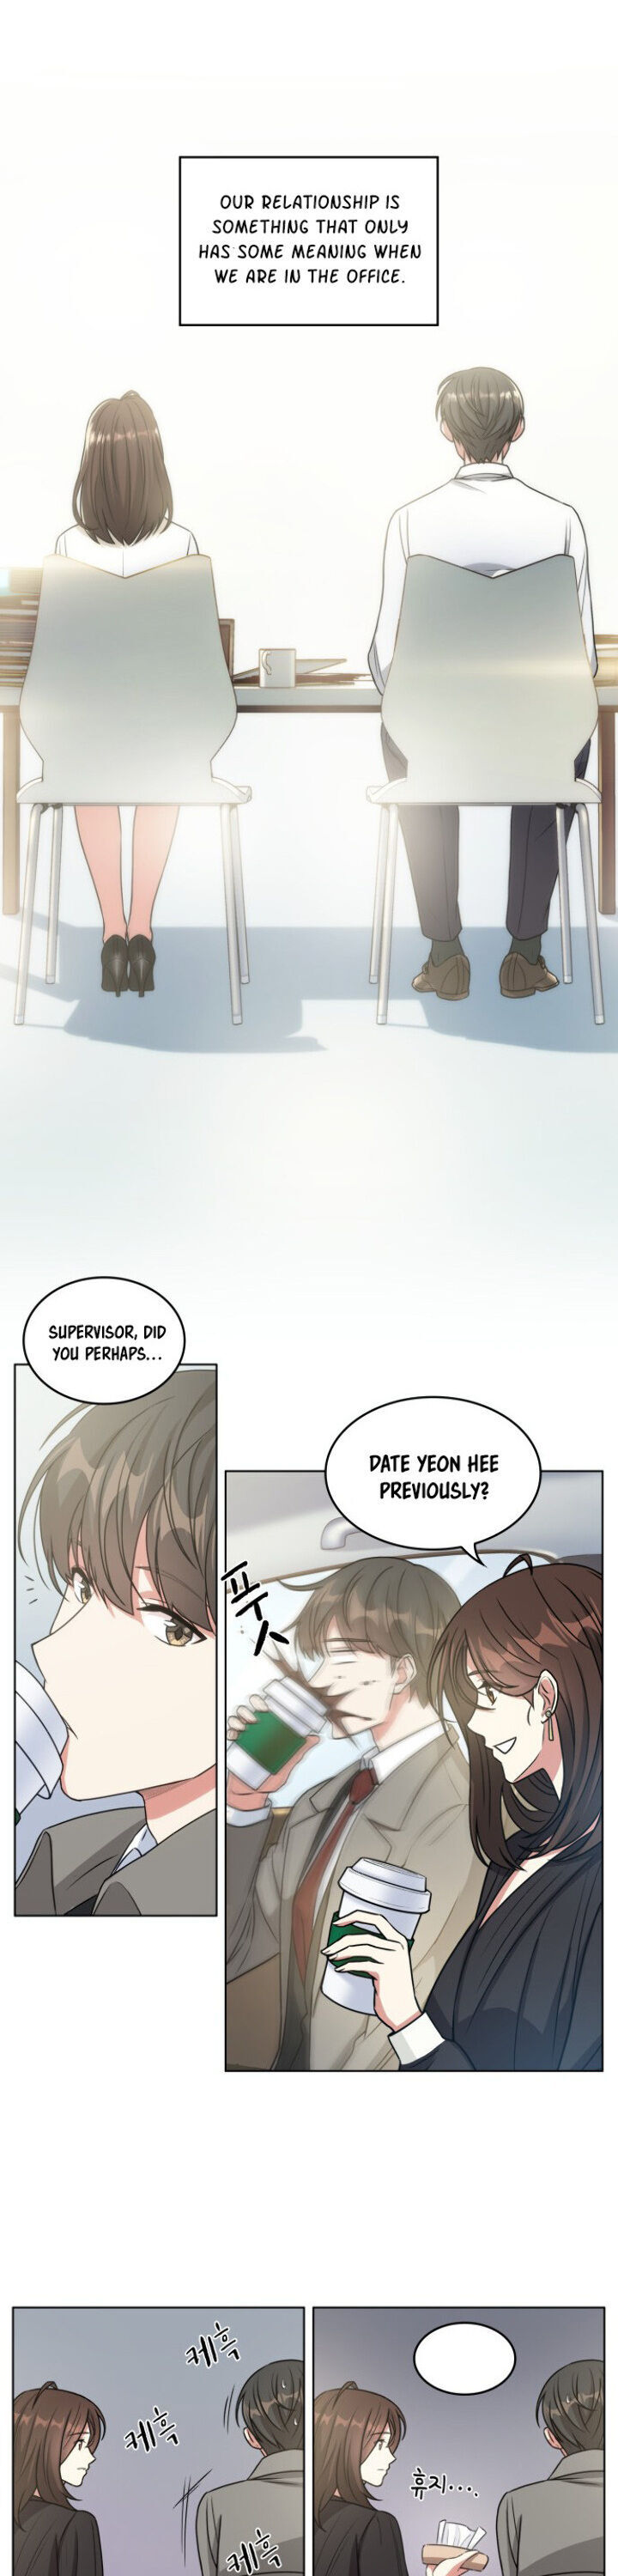 My Office Noona’s Story - Chapter 16 Page 12